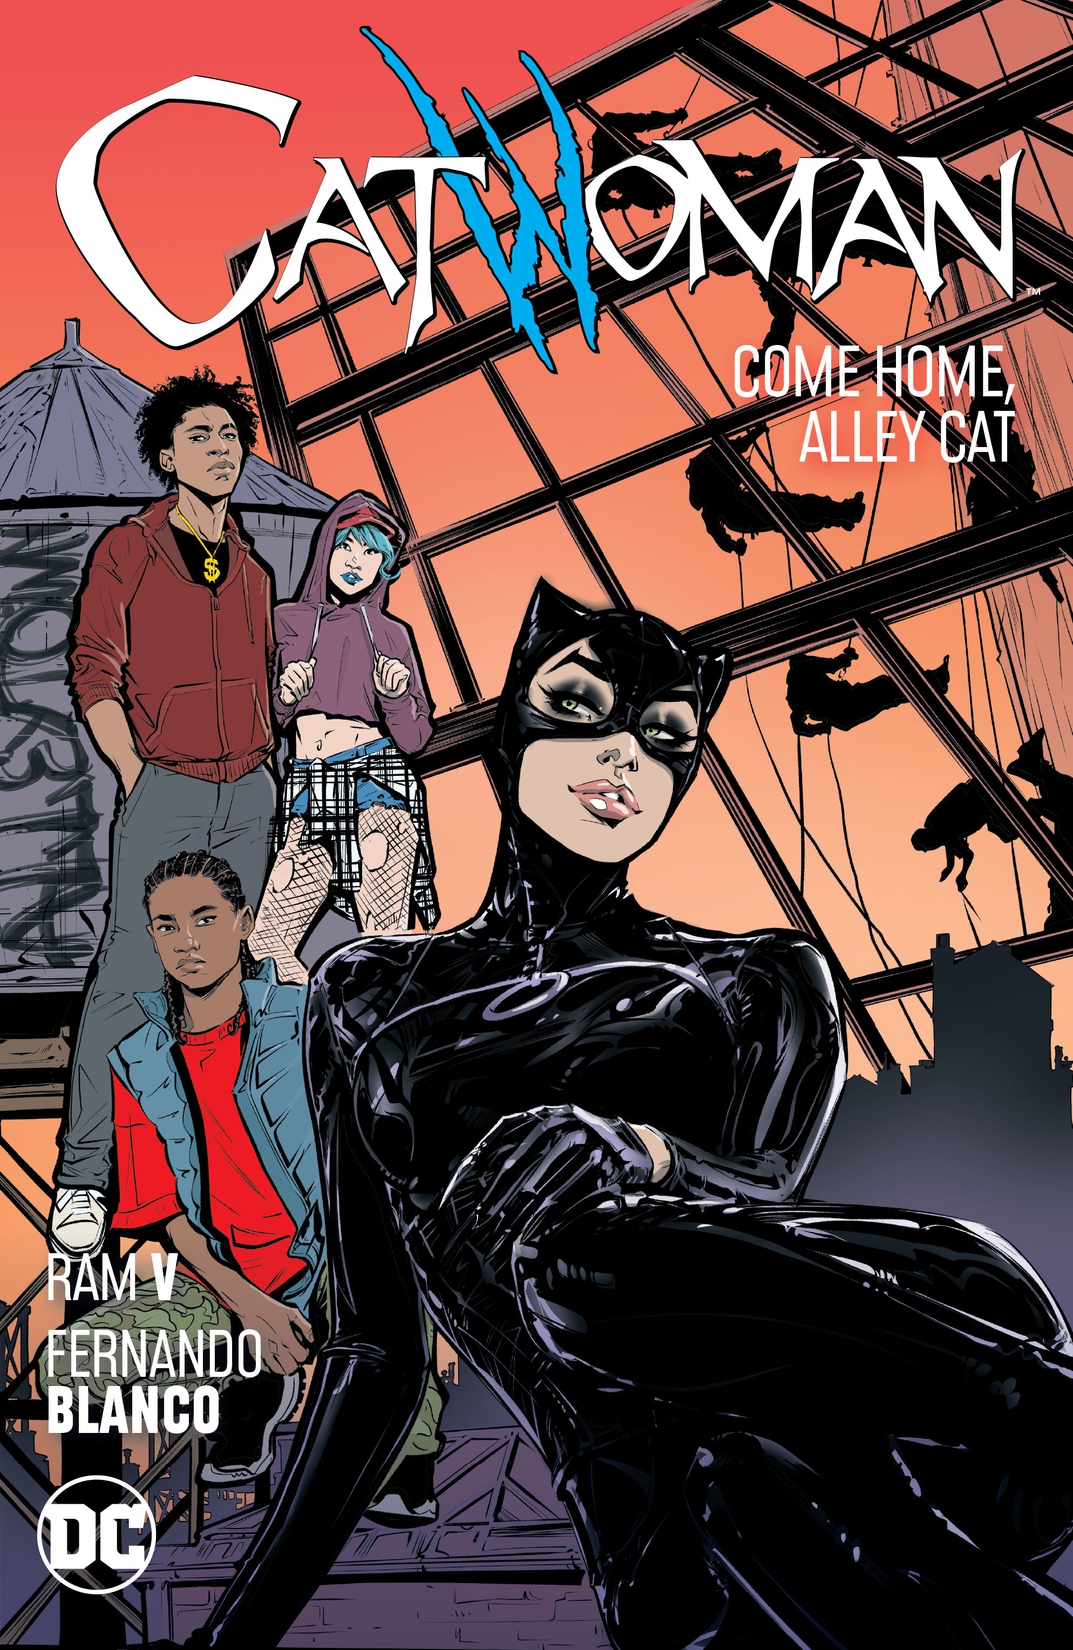 Catwoman Vol. 4: Come Home, Alley Cat preview images